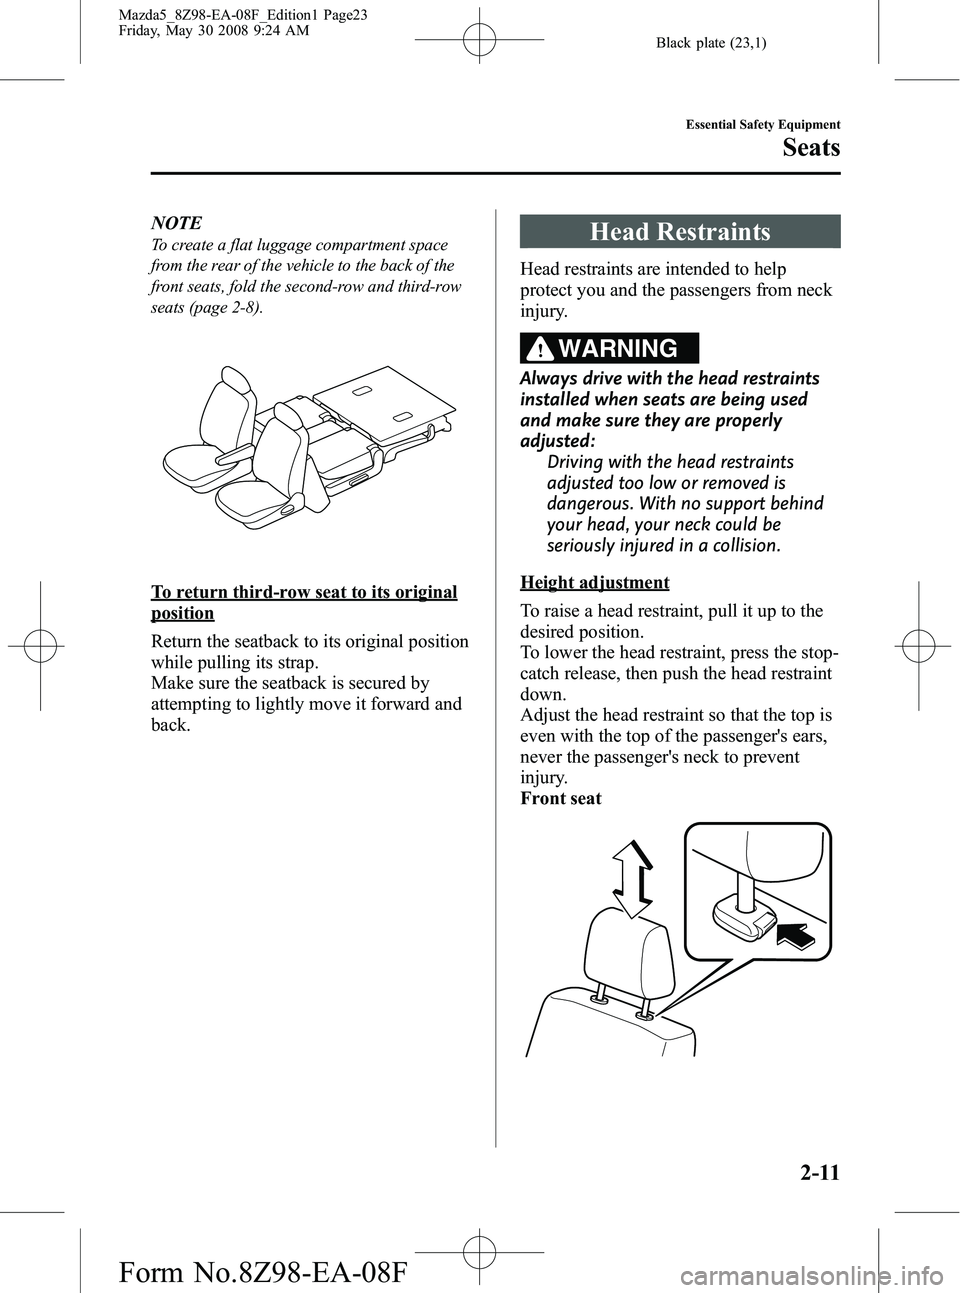 MAZDA MODEL 5 2009  Owners Manual Black plate (23,1)
NOTE
To create a flat luggage compartment space
from the rear of the vehicle to the back of the
front seats, fold the second-row and third-row
seats (page 2-8).
To return third-row 